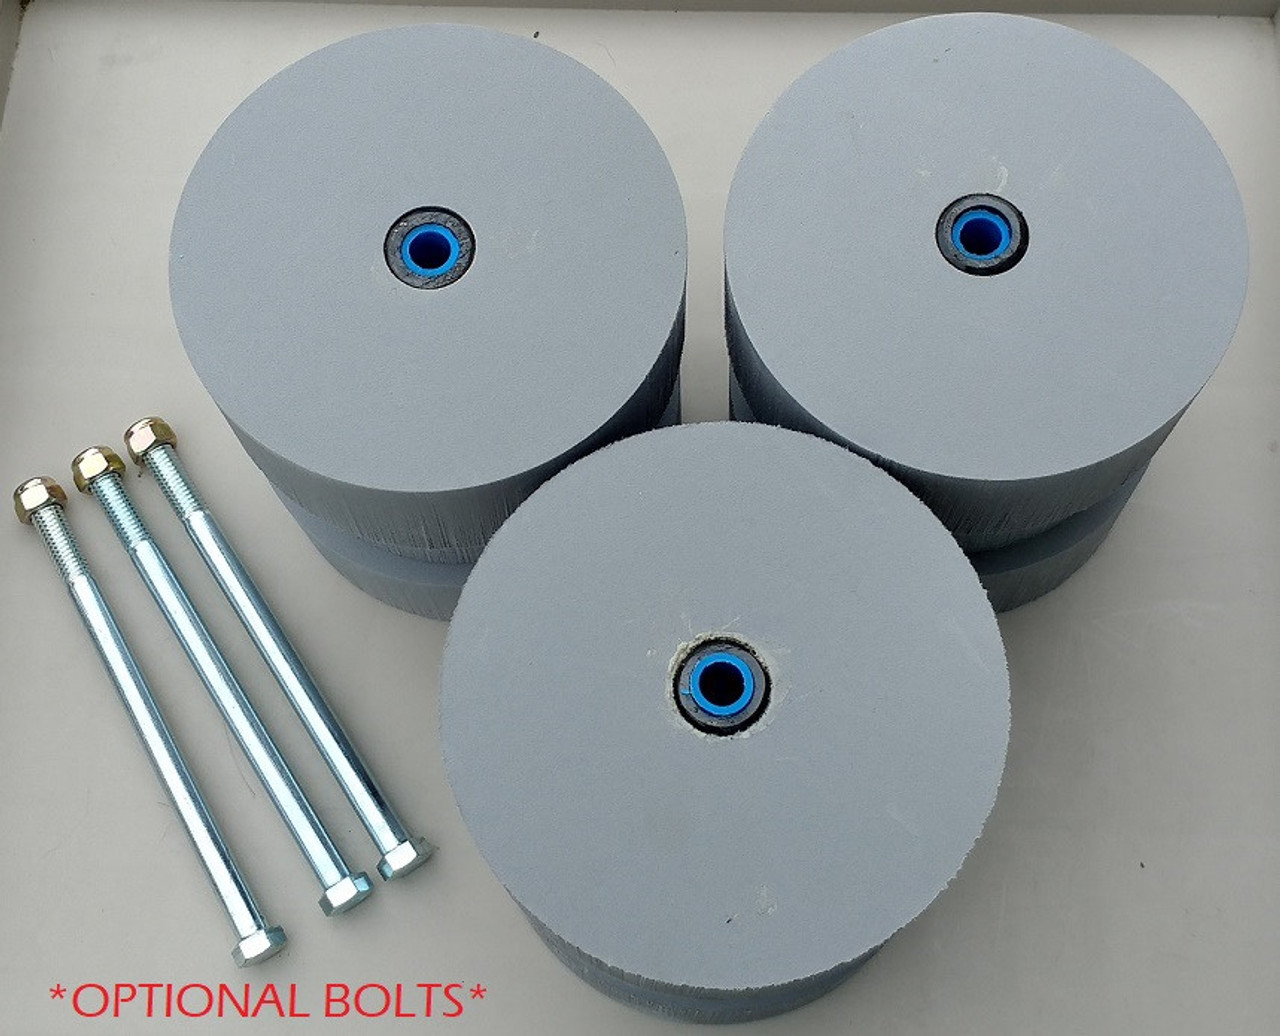 Want a great deal on ASH 7000 / ASUL 200 Rollers, Replacement ASH 7000 / ASUL 200 Rollers, ist roller, ist replacement roller, ASH 7000 table part, ASUL 200 Rollers, ASH 7000 Rollers, ist roller for sale, replacement roller, ASH 7000 table part, ASUL 200 table part, table rollers, table rollers for sale?